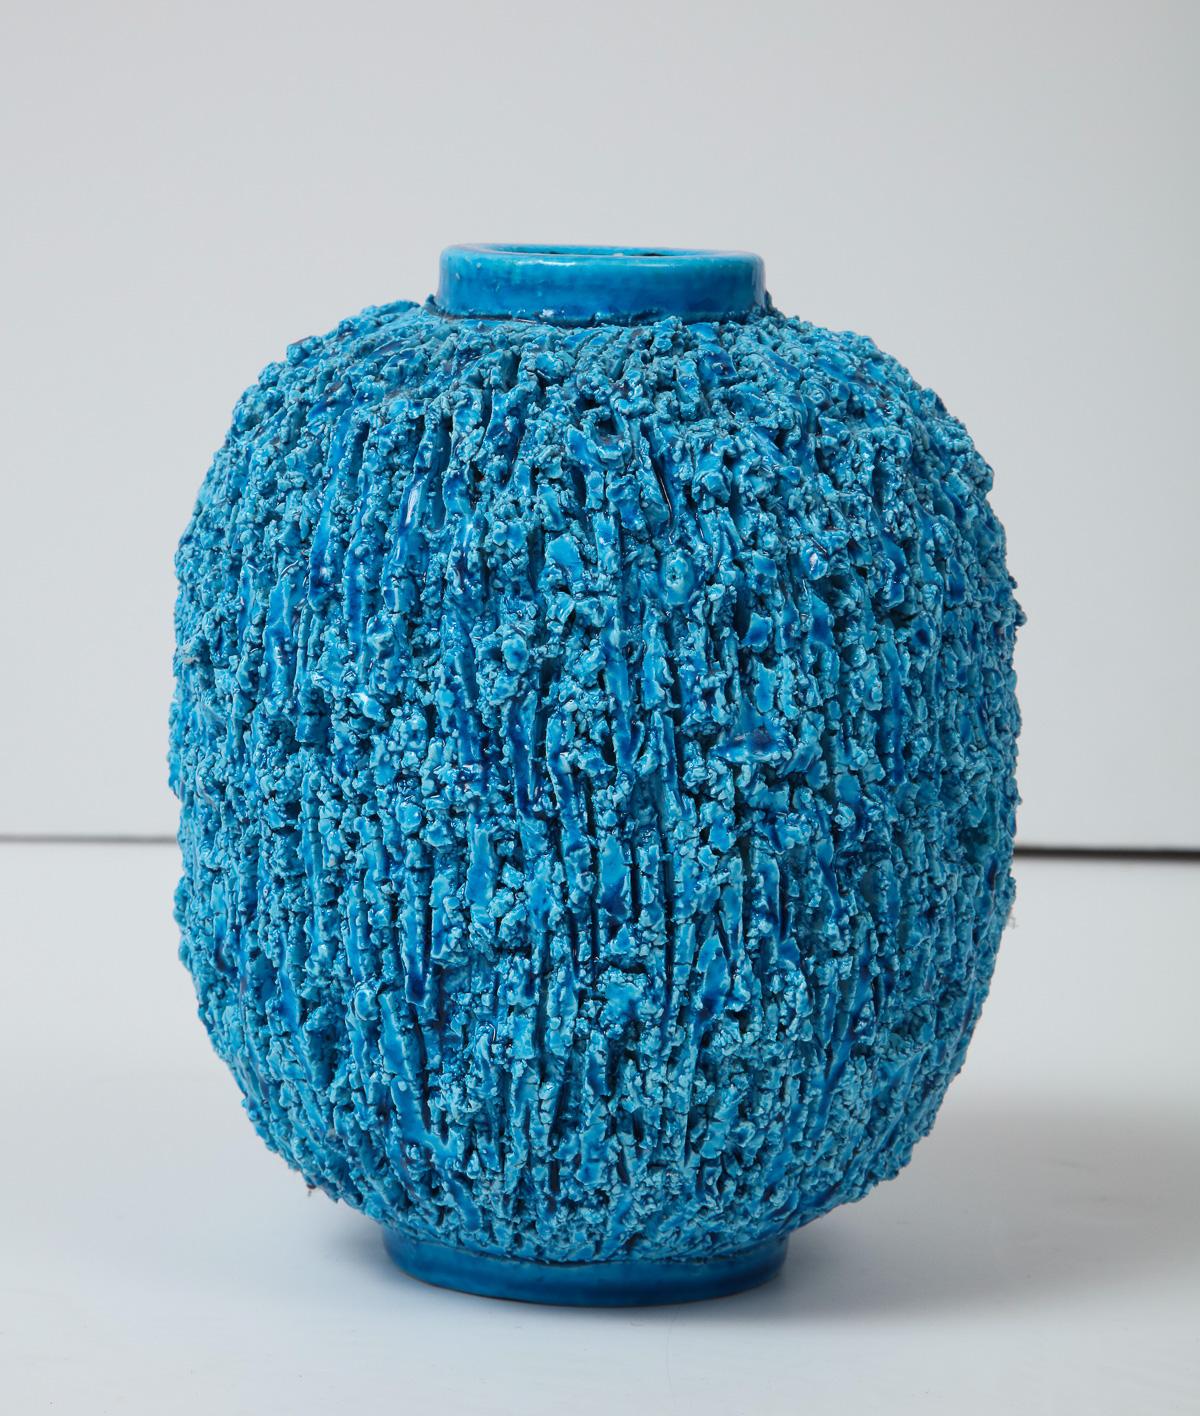 Beautiful turquoise vase by Gunnar Nylund, Gustavsberg, Sweden, circa 1950. The group is called 